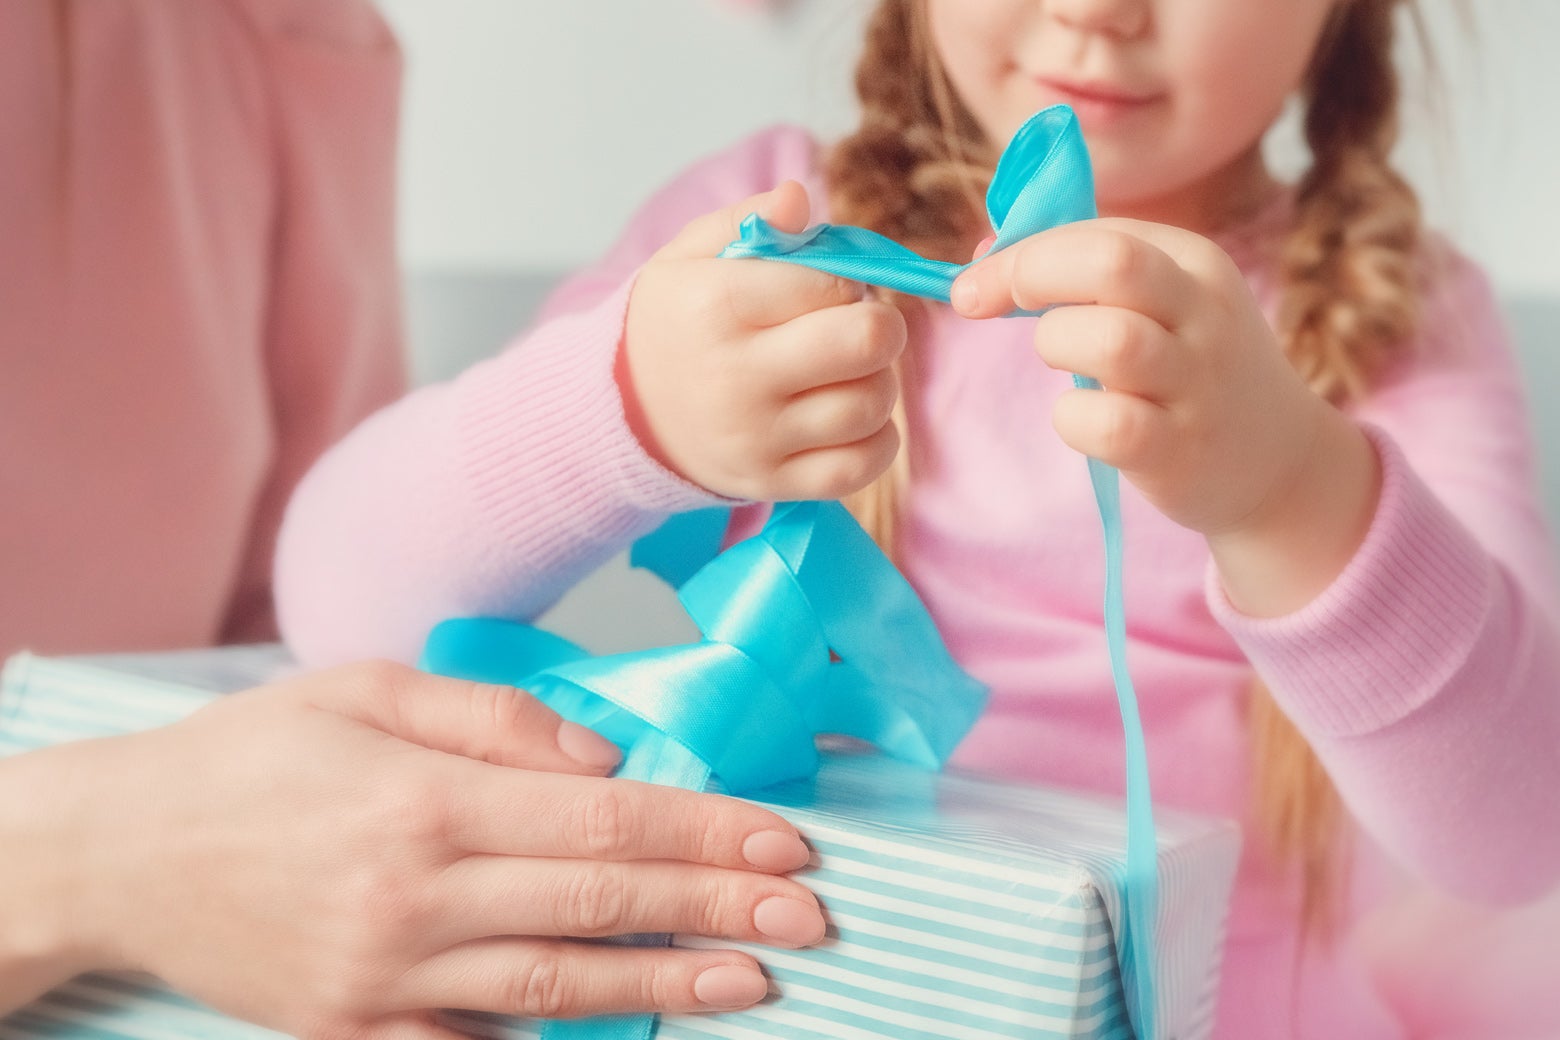 A child untangles blue ribbon from a wrapped present.